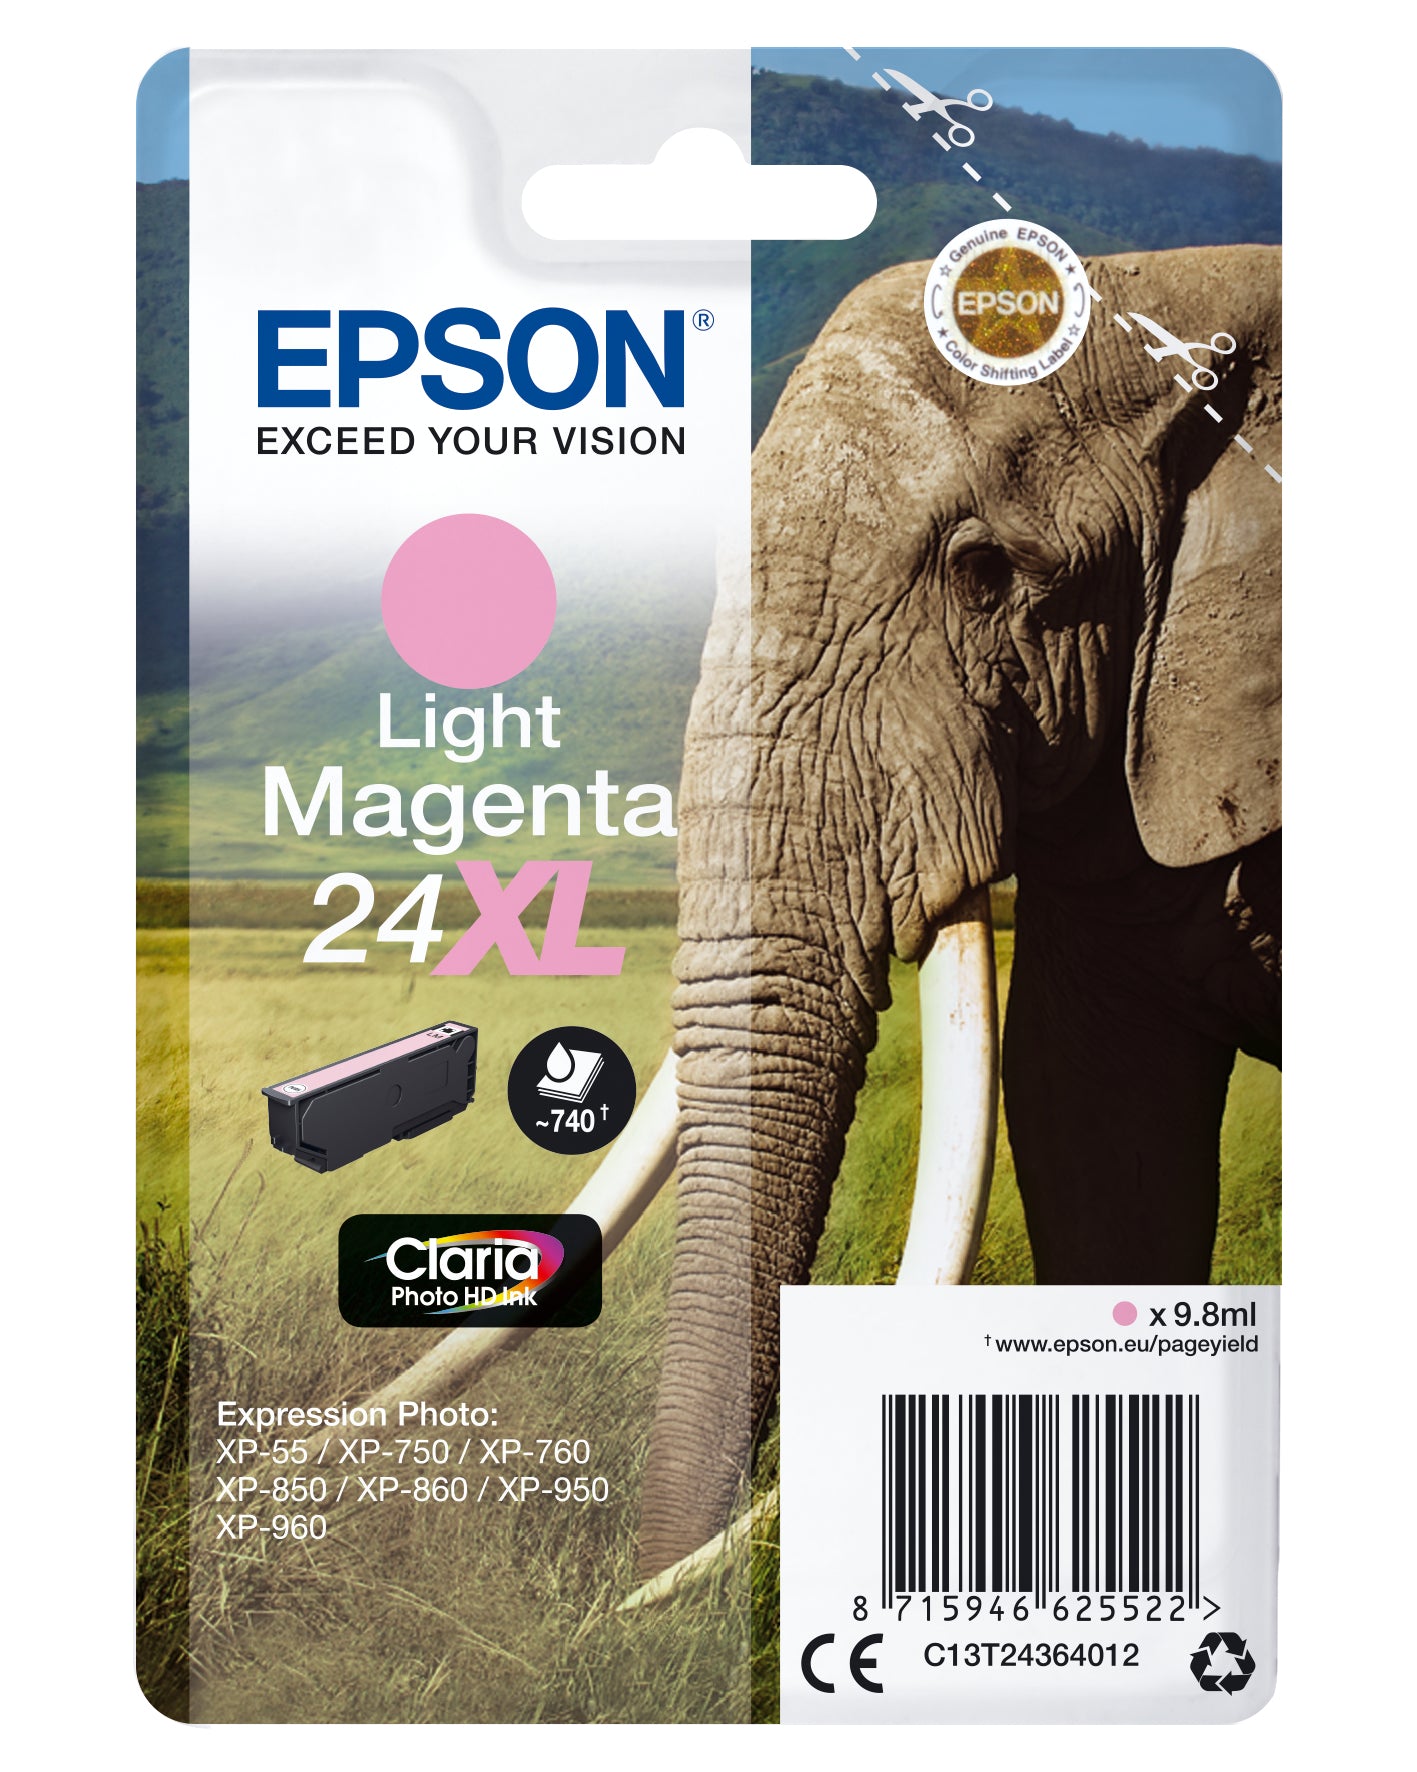 Epson C13T24364012/24XL Ink cartridge light magenta high-capacity, 500 pages 9,8ml for Epson XP 750